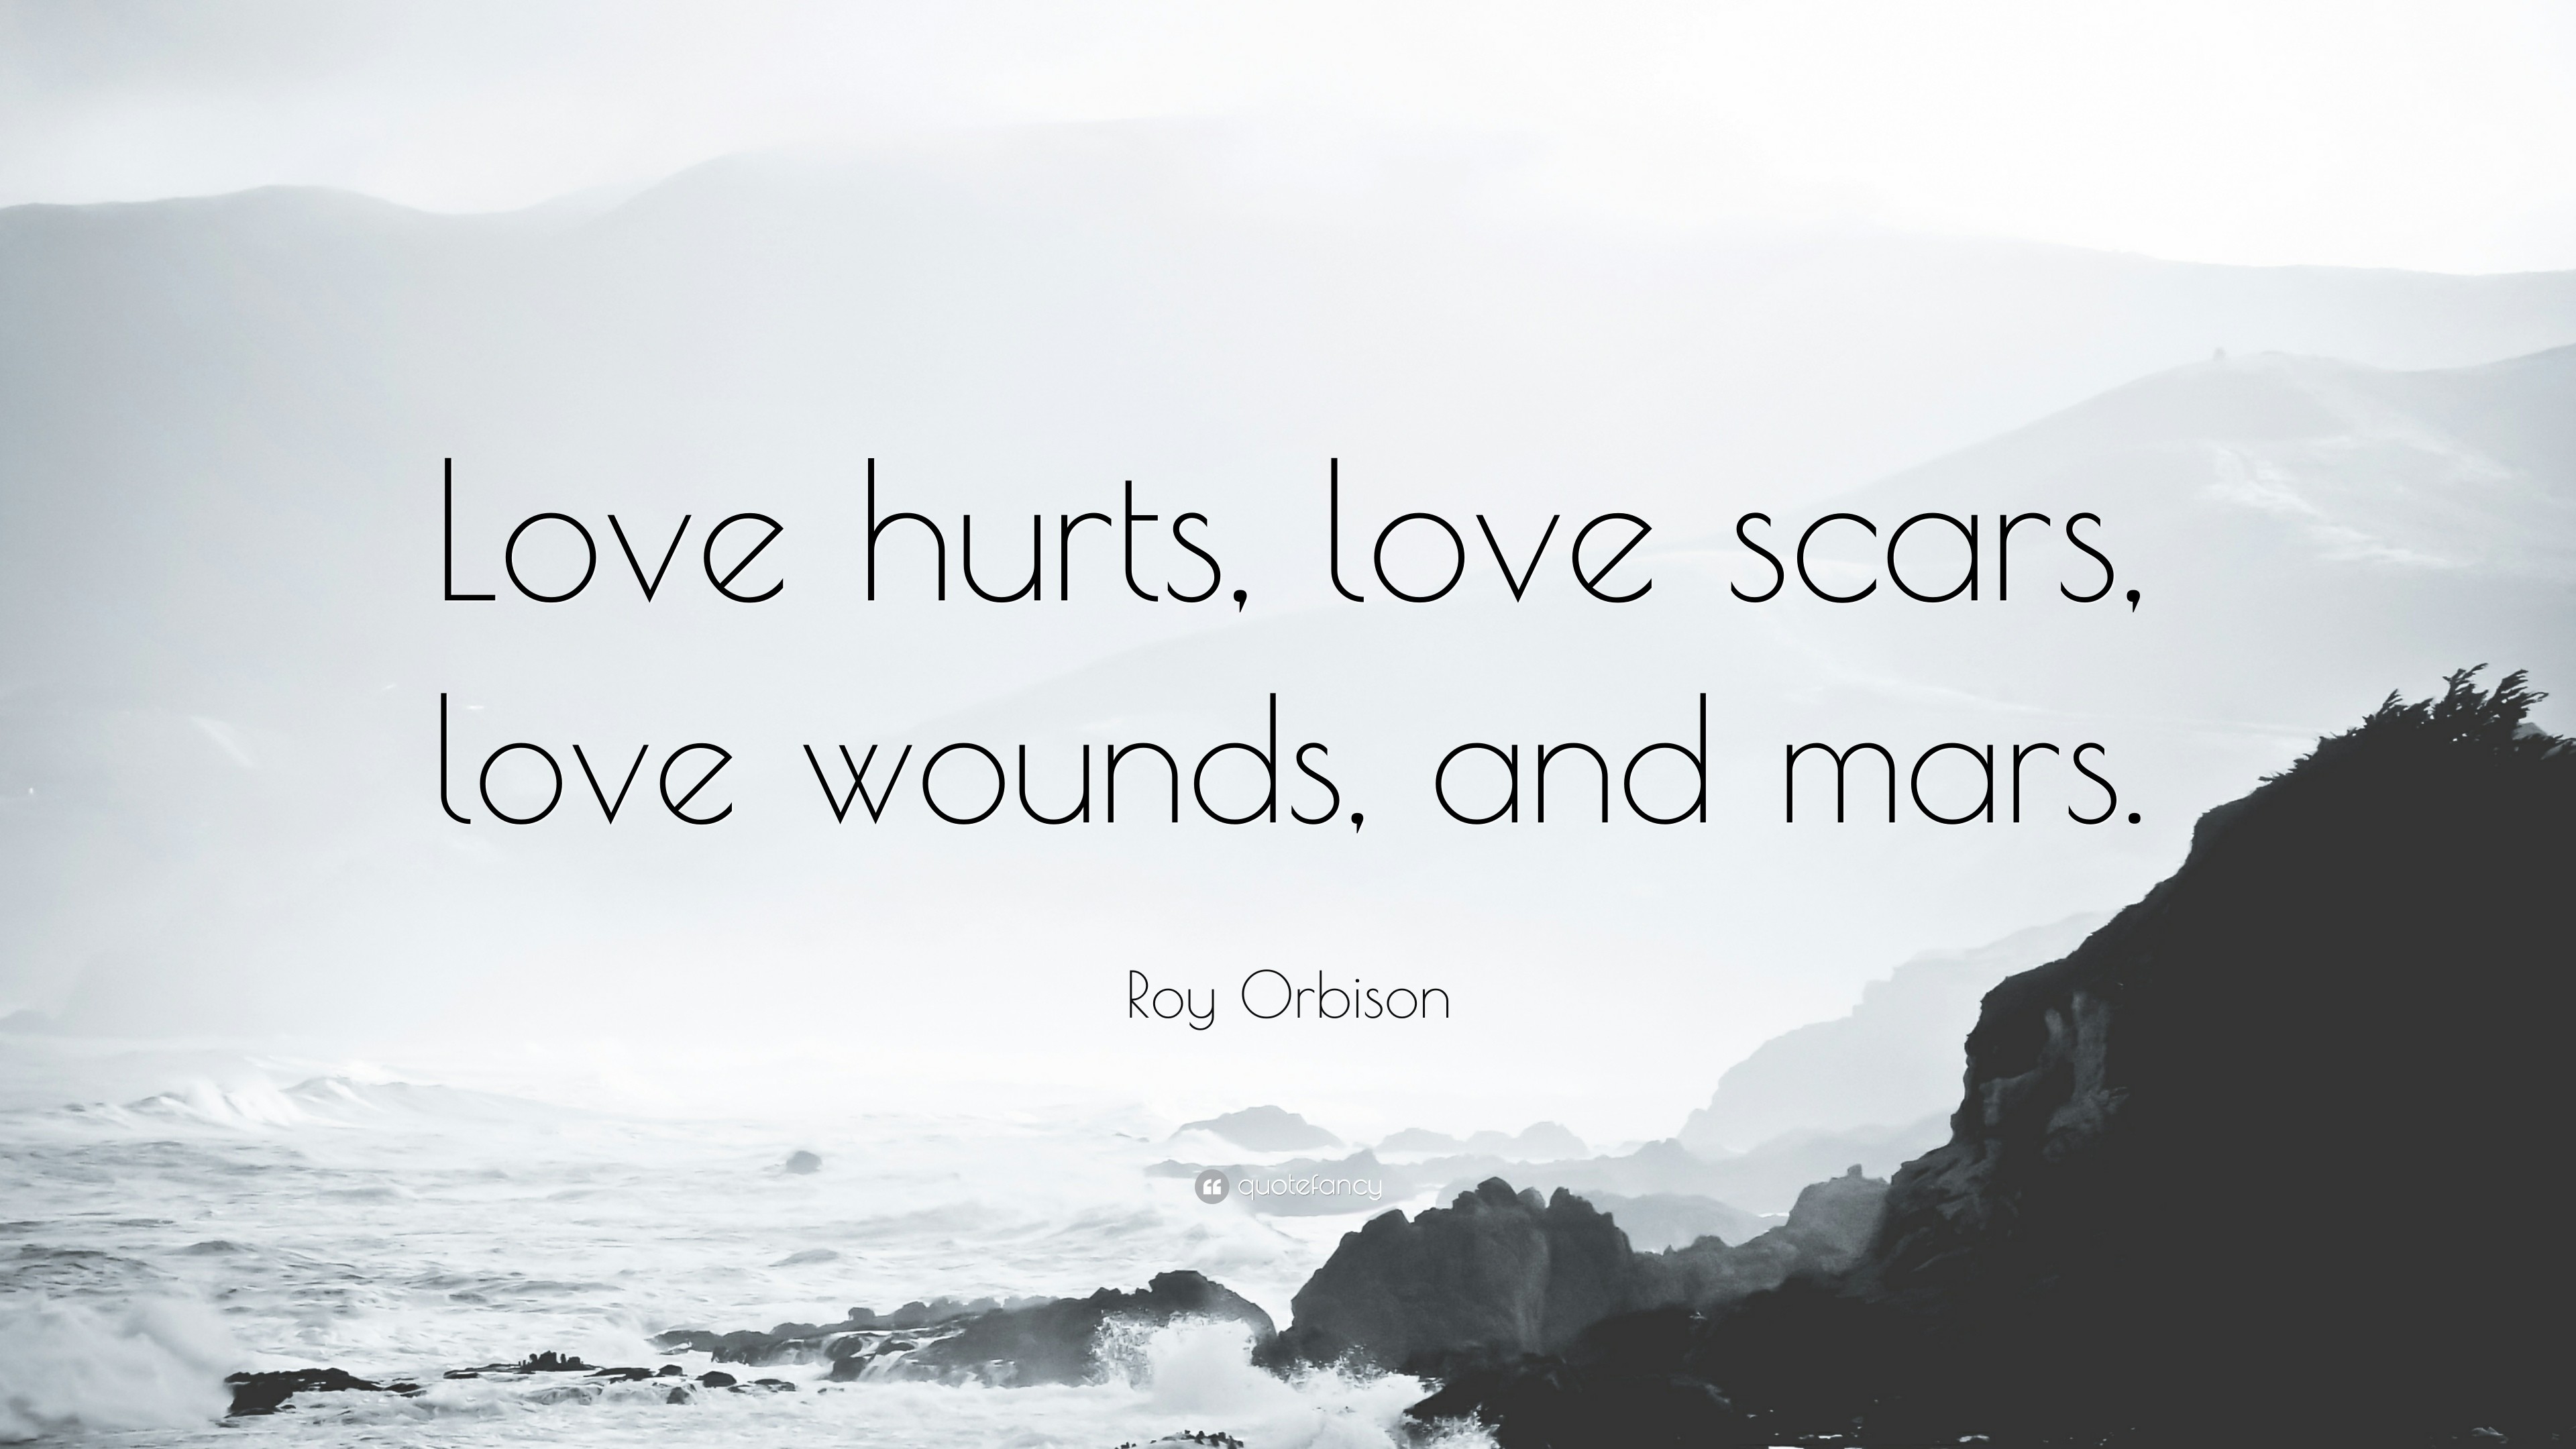 3840x2160 Roy Orbison Quote: “Love hurts, love scars, love wounds, and mars